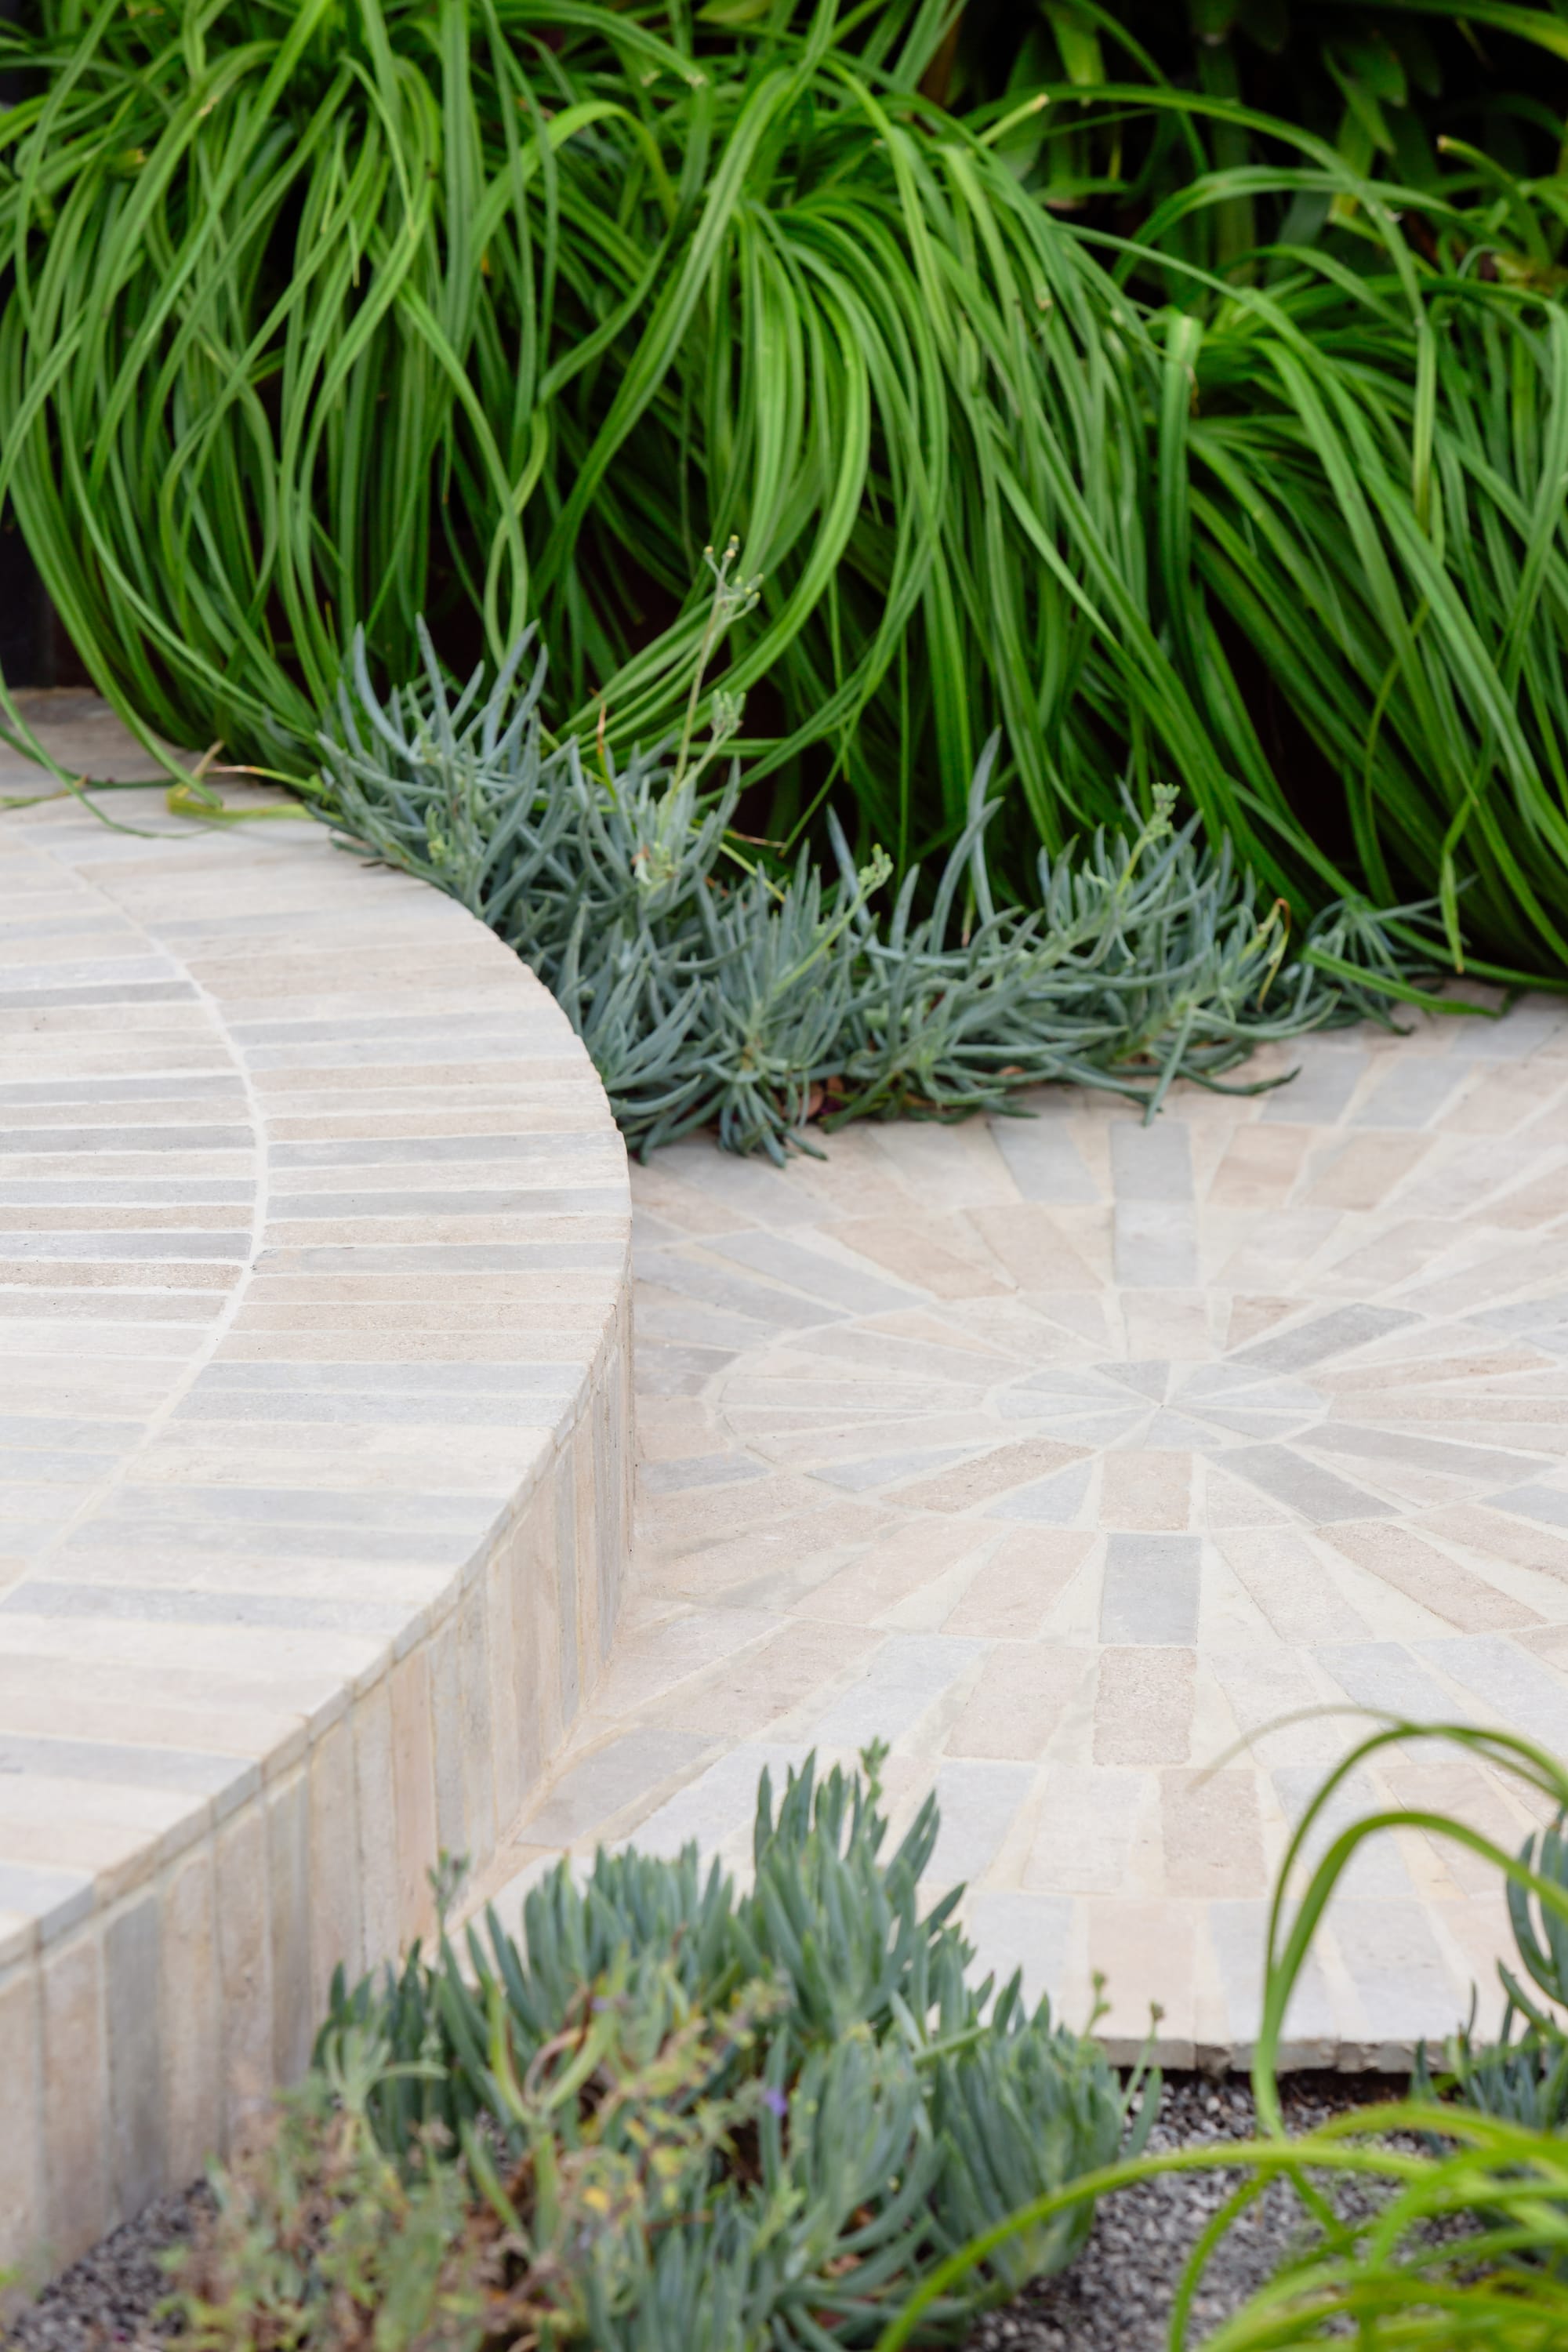  Iris Glen Iris by Julie Crowe Landscape Design. Photography by Erik Holt Photography. Close up of circular paved footpath in garden. Paved circle surrounded by green shrubs and native plants. 